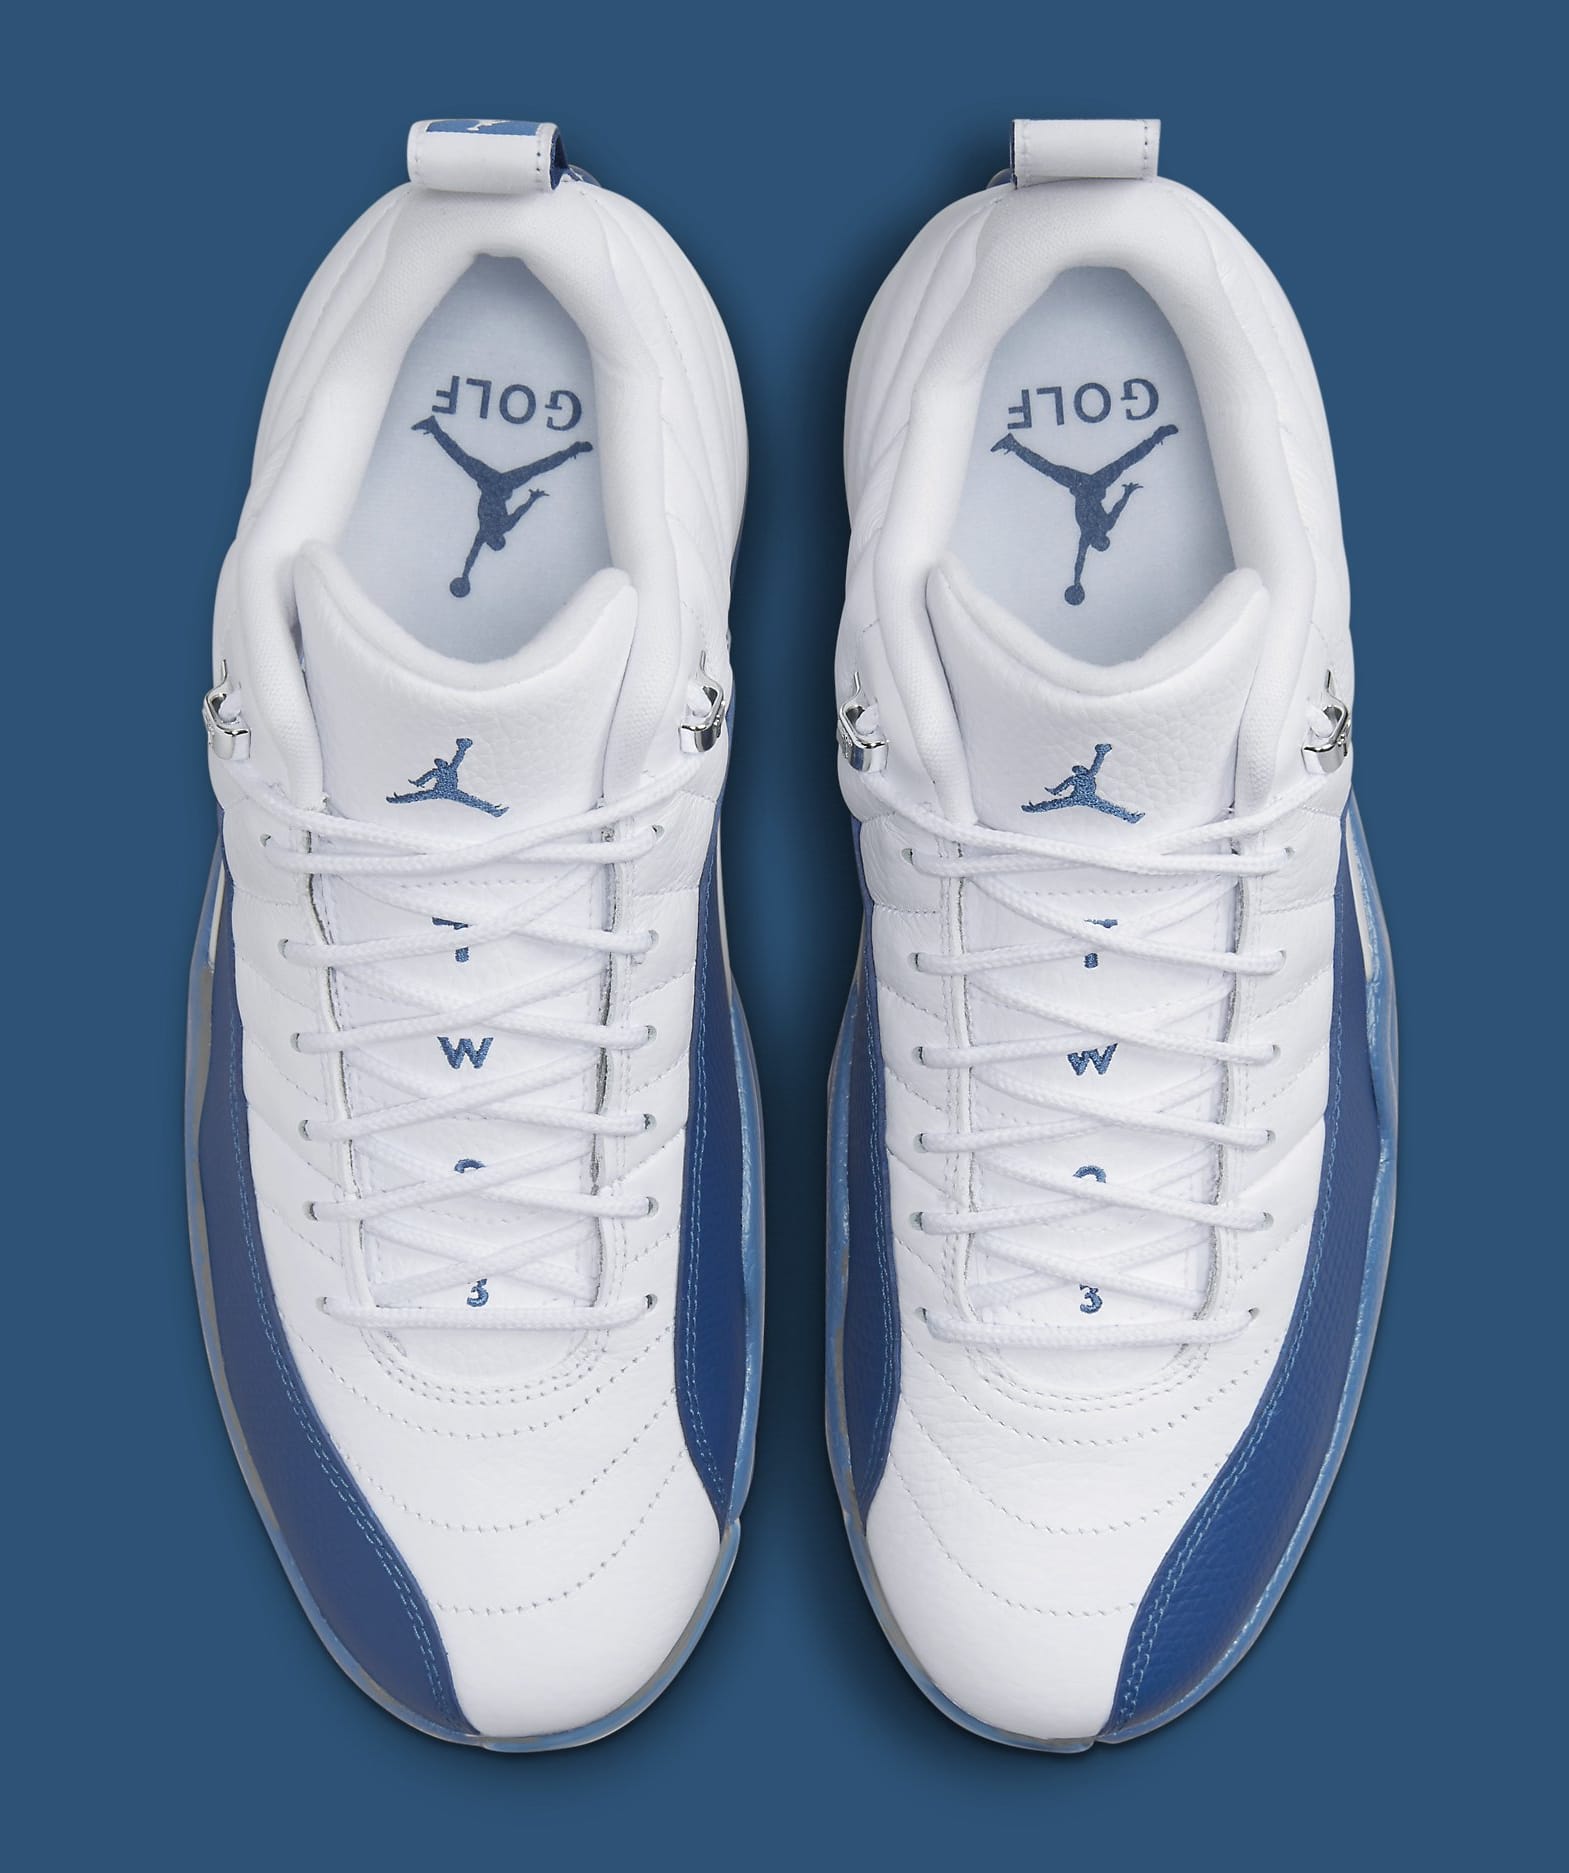 Air Jordan 12 Low Golf 'French Blue' Release Date DH4120 101 